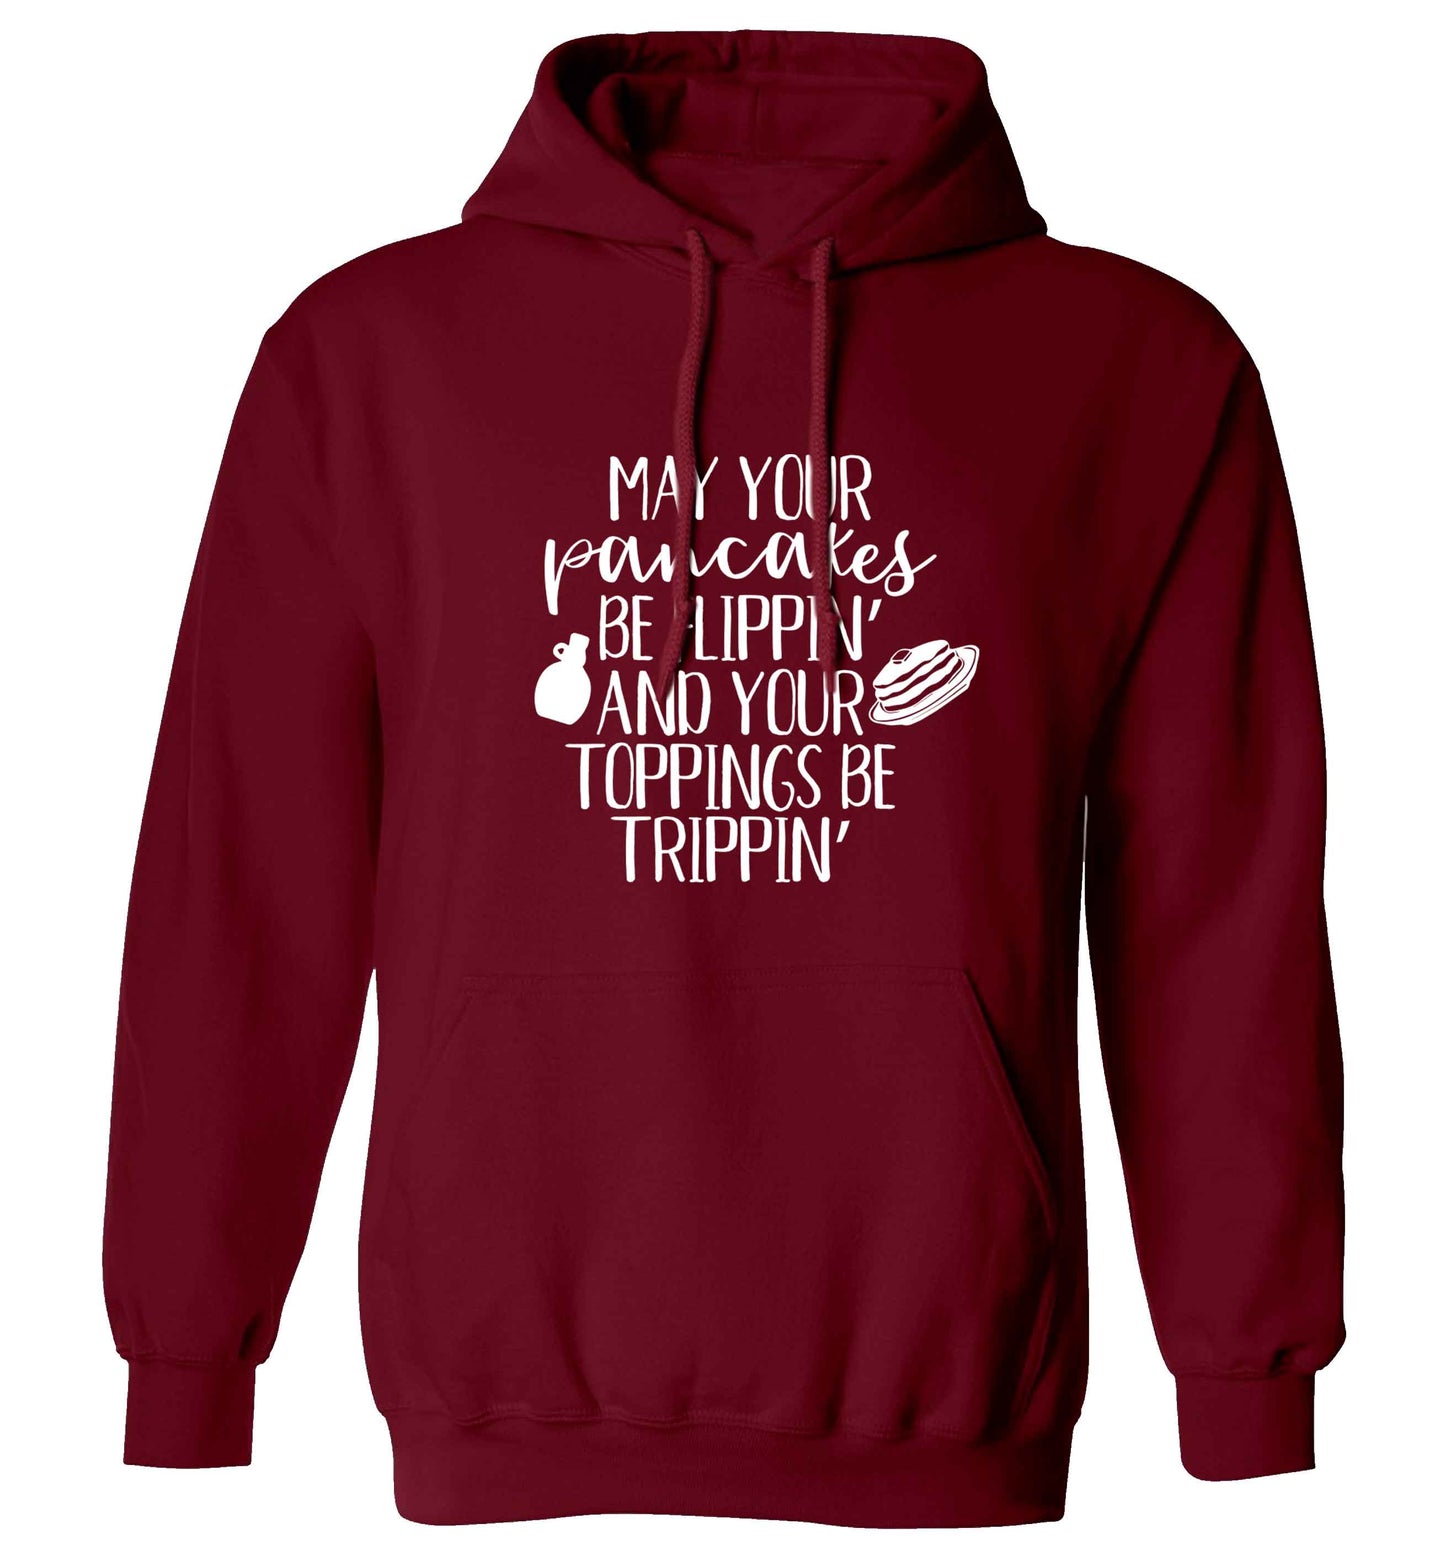 May your pancakes be flippin' and your toppings be trippin' adults unisex maroon hoodie 2XL